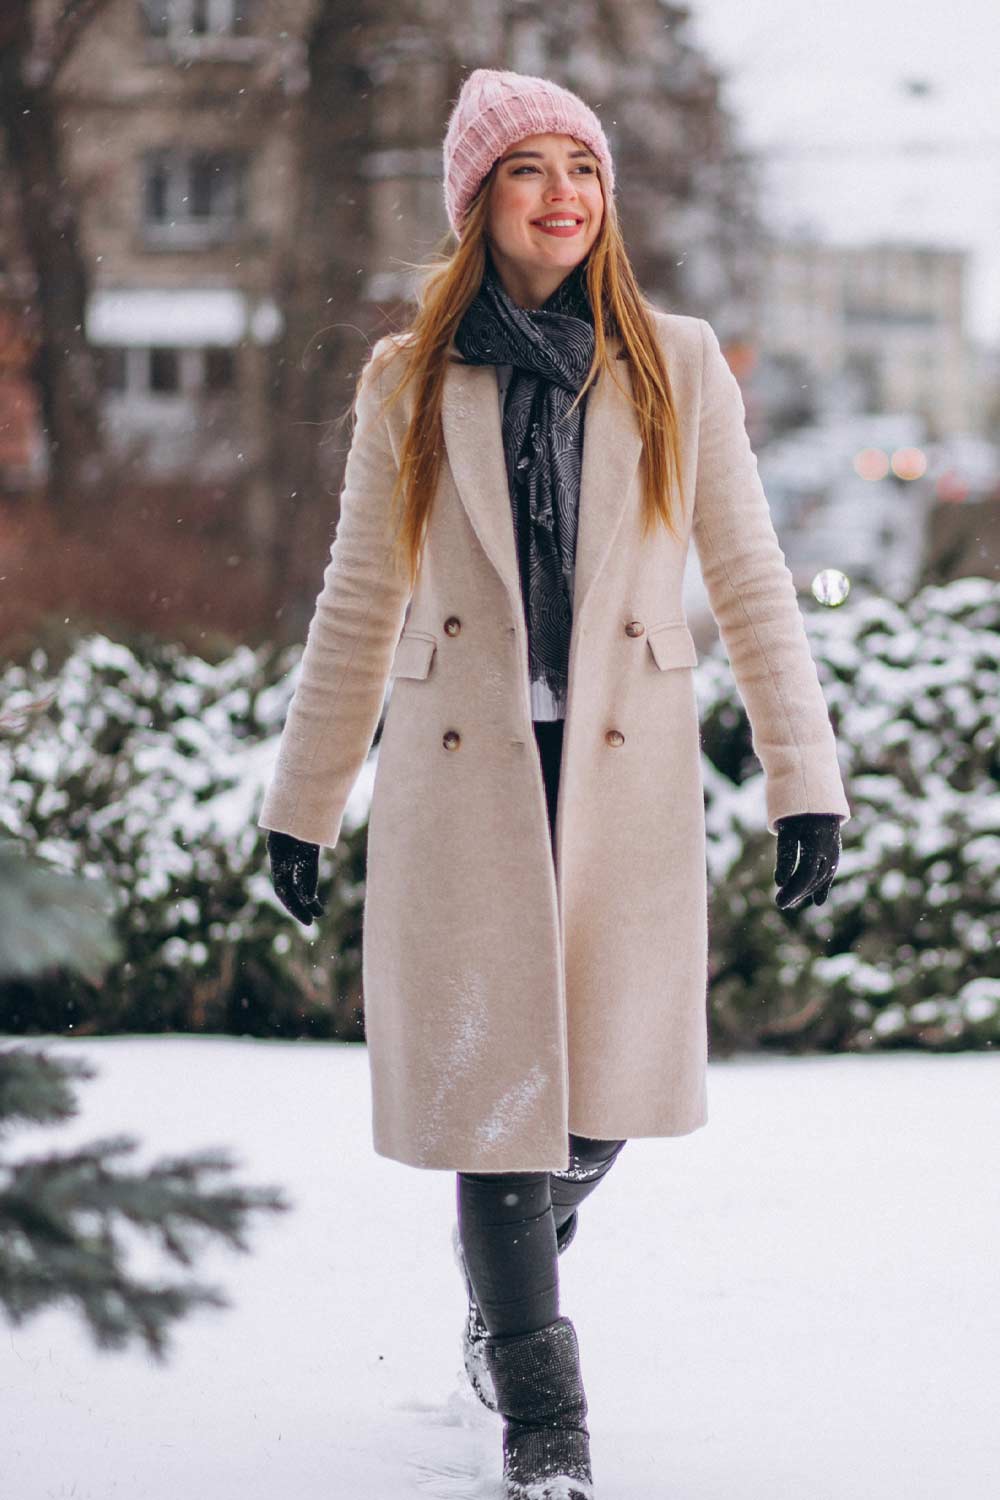 Winter Outfit Idea with Classy Coat and Knitted Hat